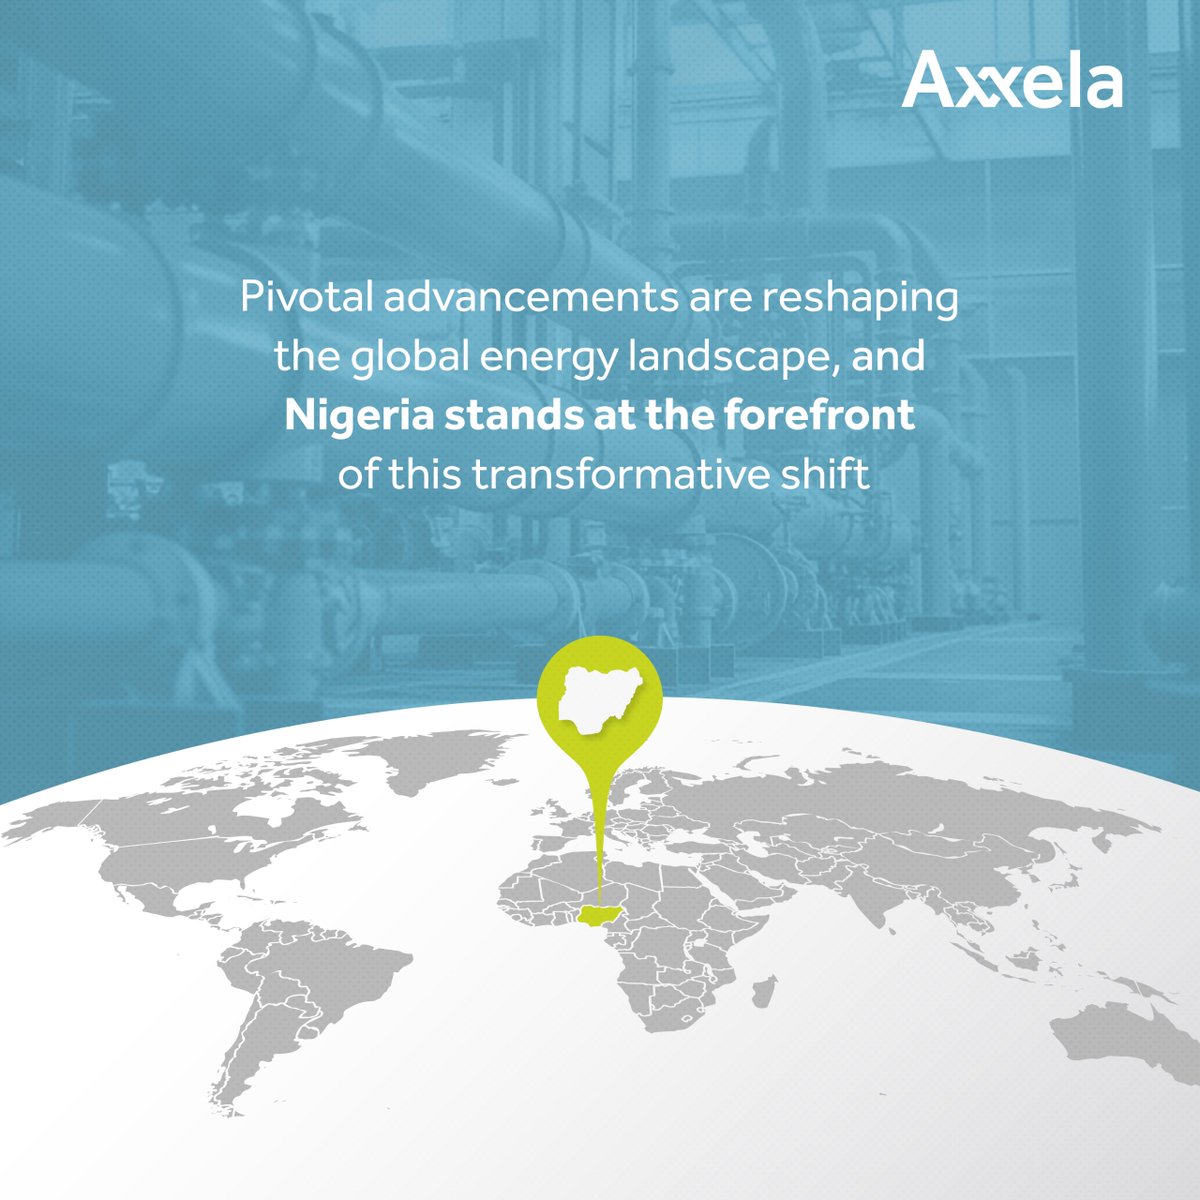 Pivotal advancements are reshaping the global energy landscape, and Nigeria stands at the forefront of this transformative shift.